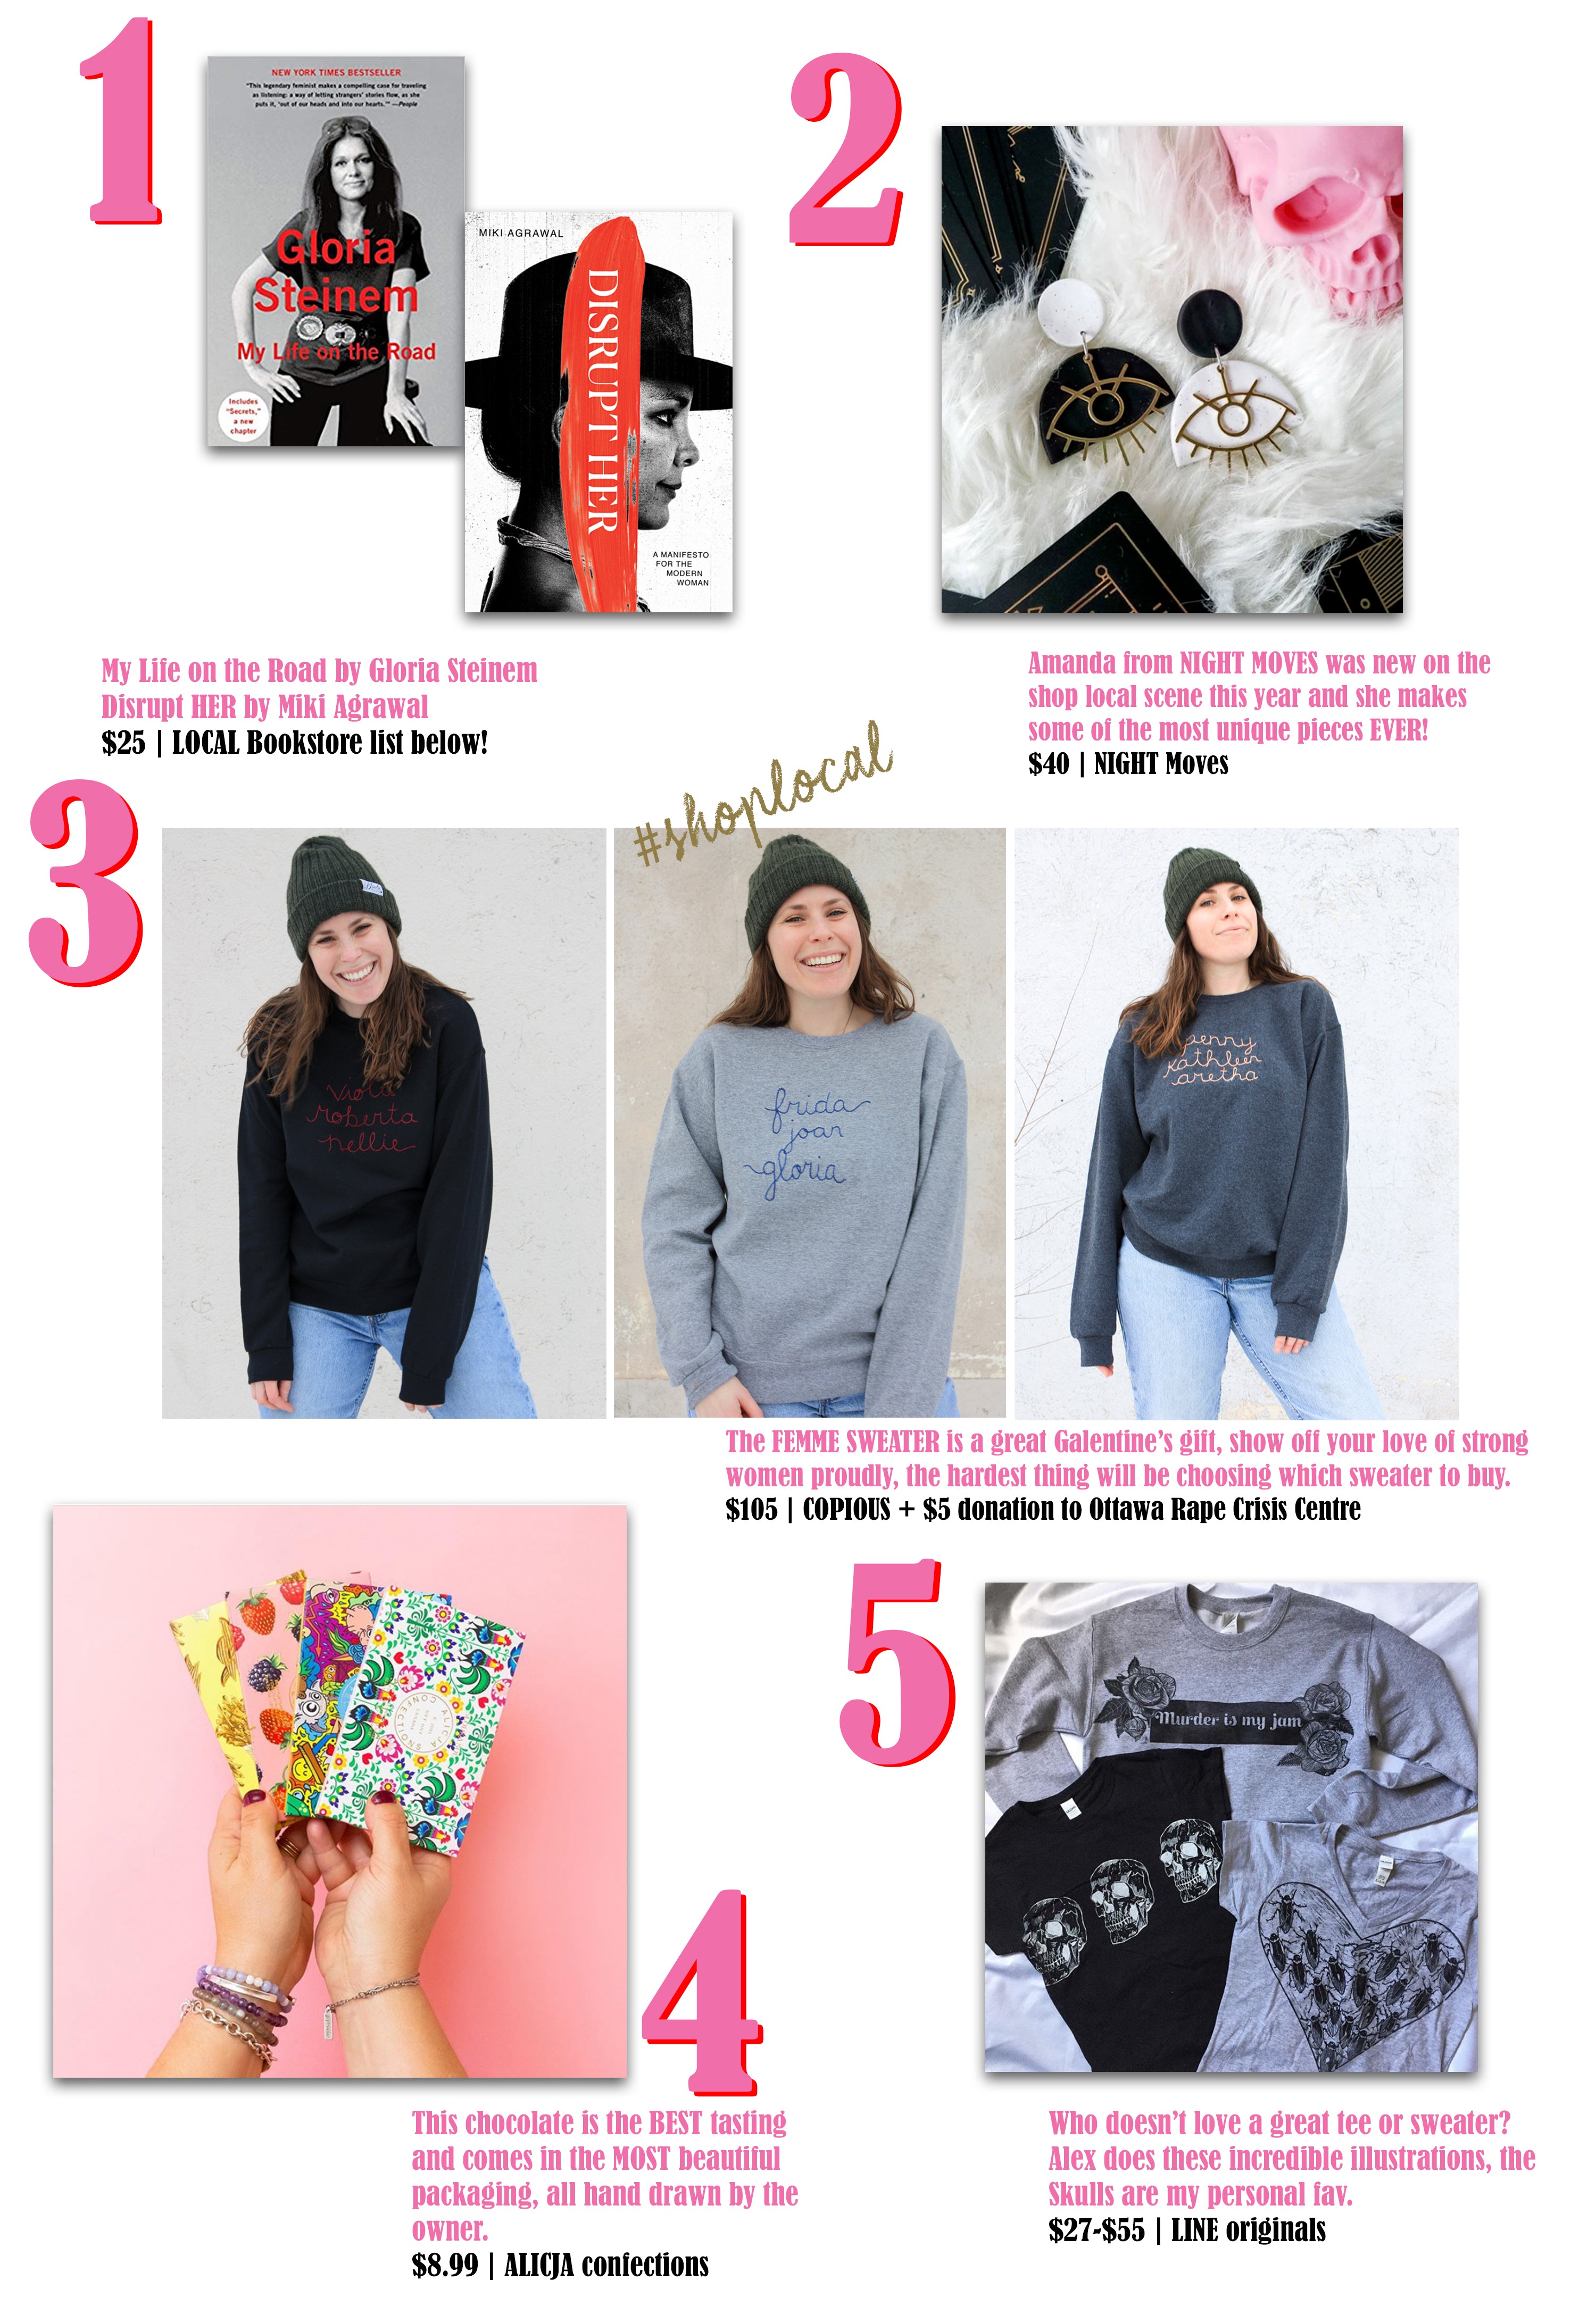 galentine's gift guide, canadian made gift guide, gloria steinem, night moves atelier, alicja confections, LINEoriginal, Copious Femme Sweater